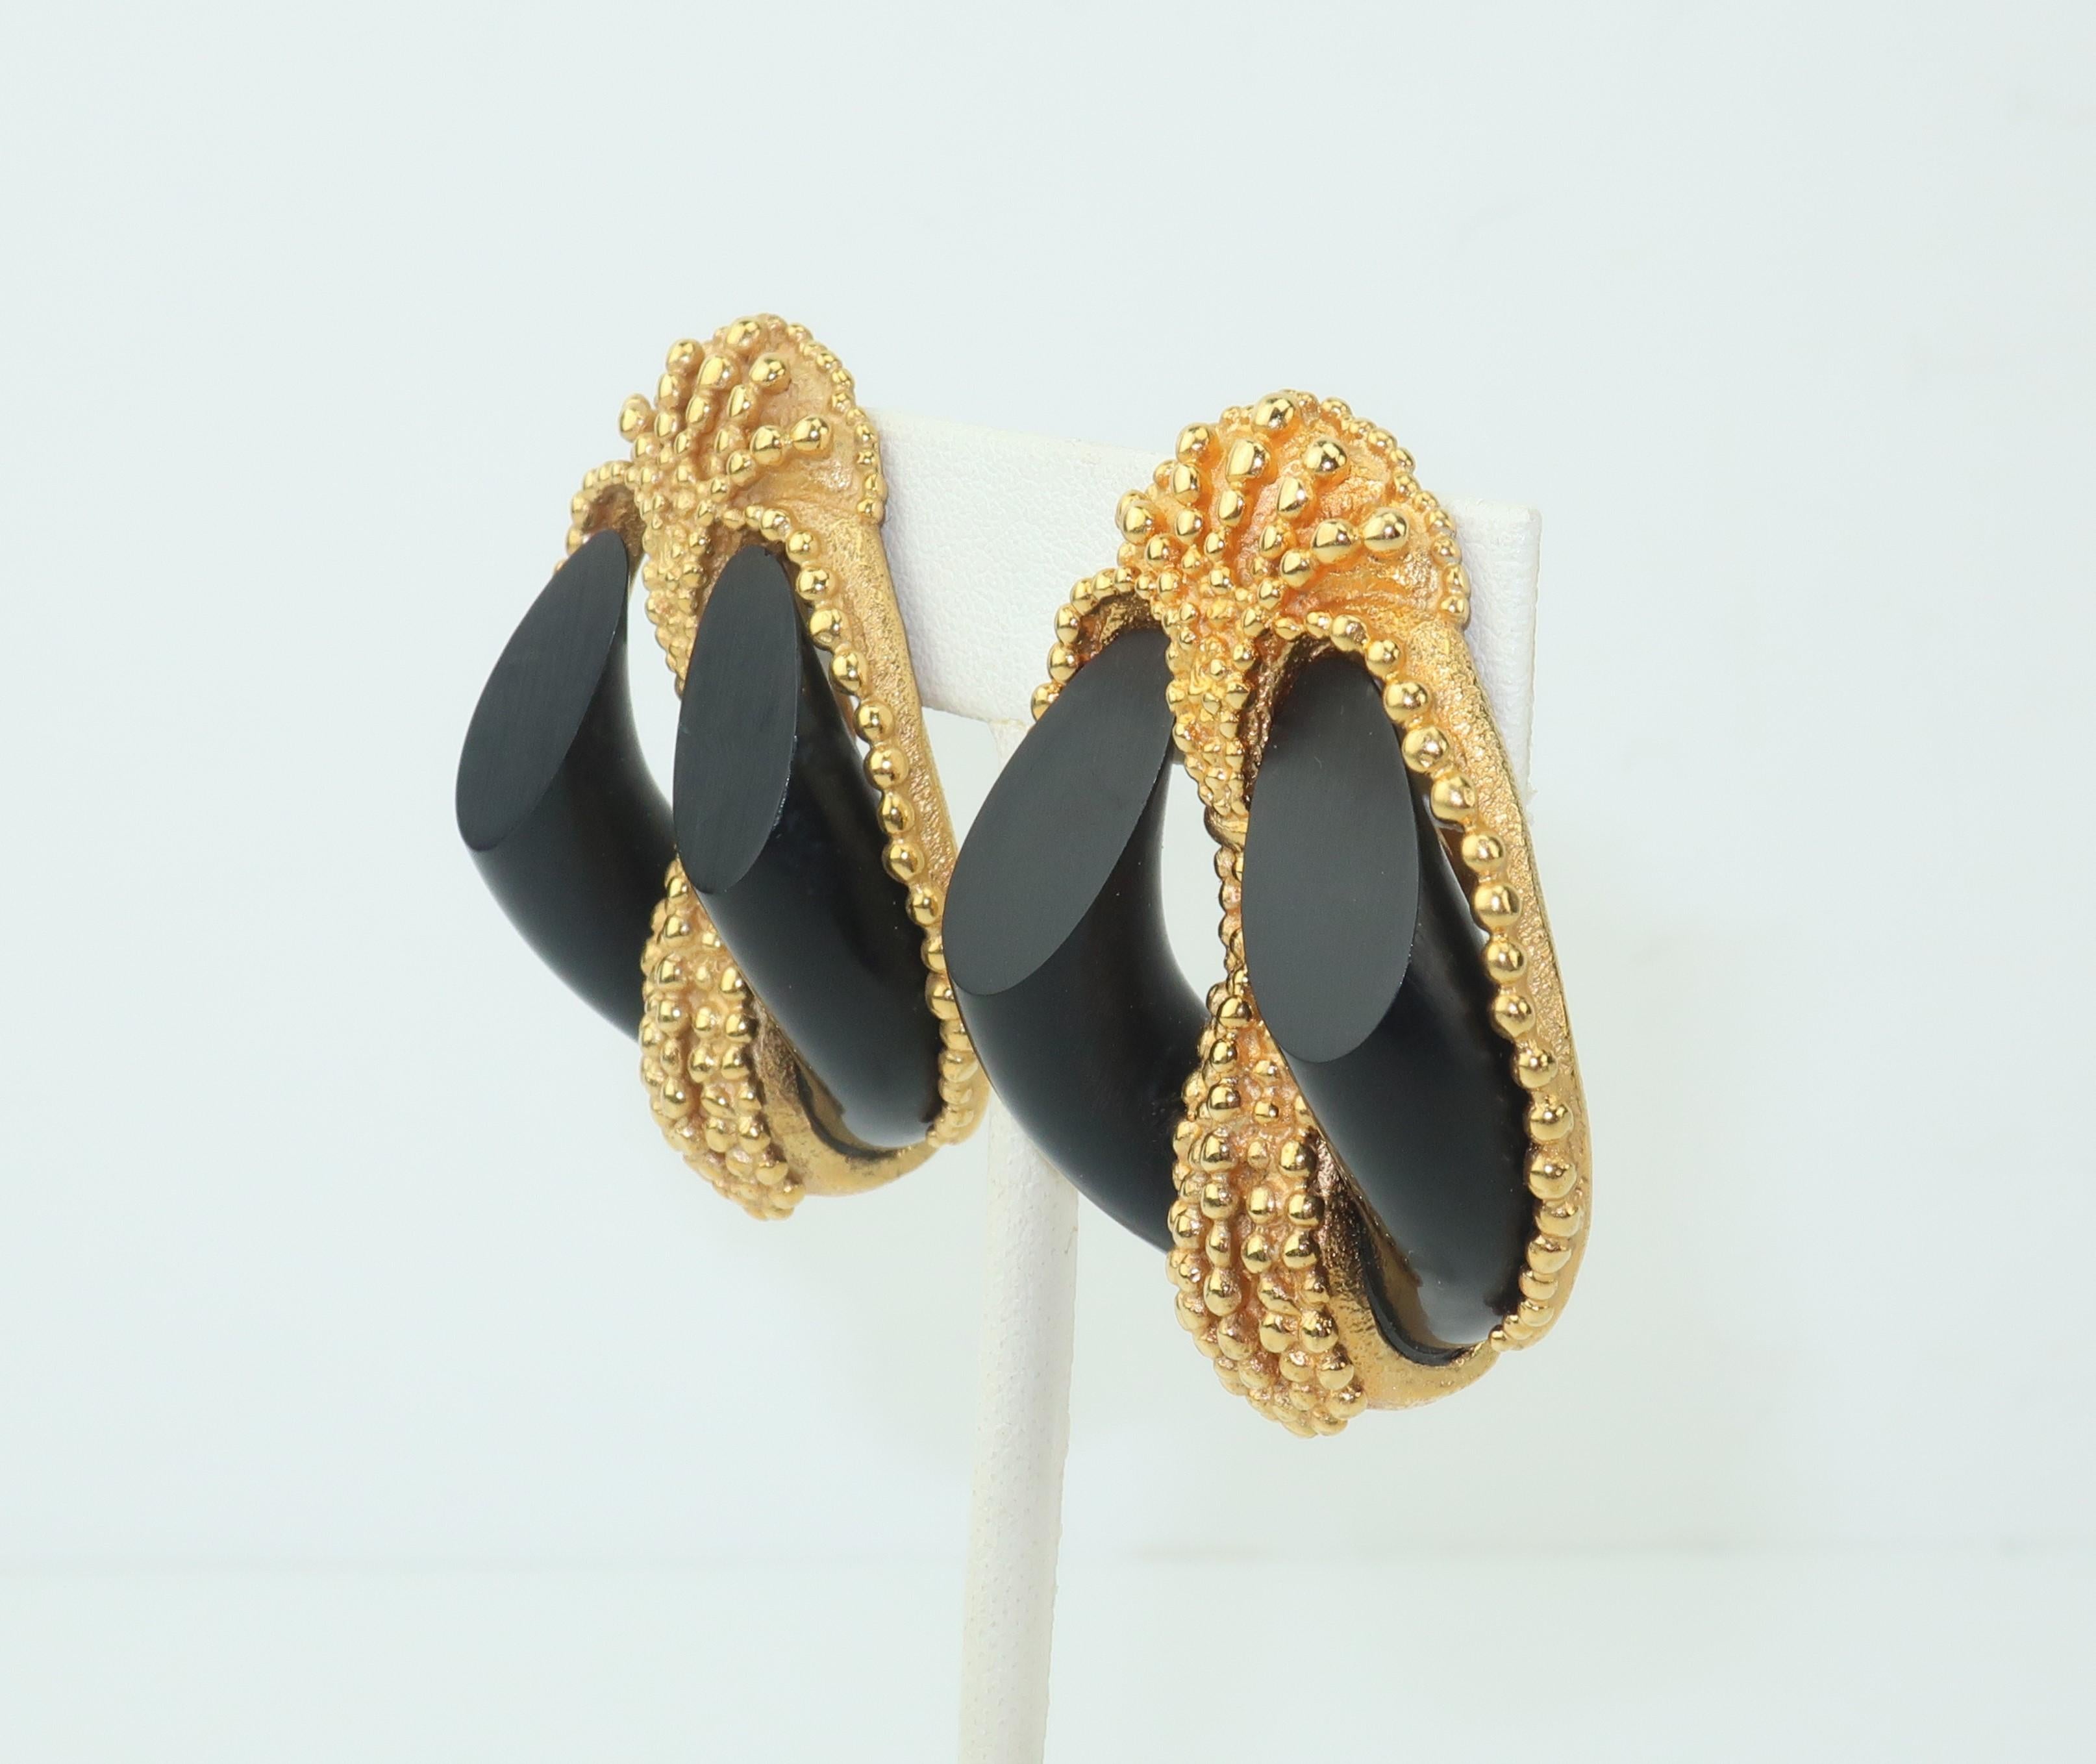 Inna Cytrine ornate gold tone earrings with detailed beading which frames a horseshoe shaped piece of black resin replicating ebony.  The design offers an eye catching combination of glamour and an organic form.  Signed to the back of each earring